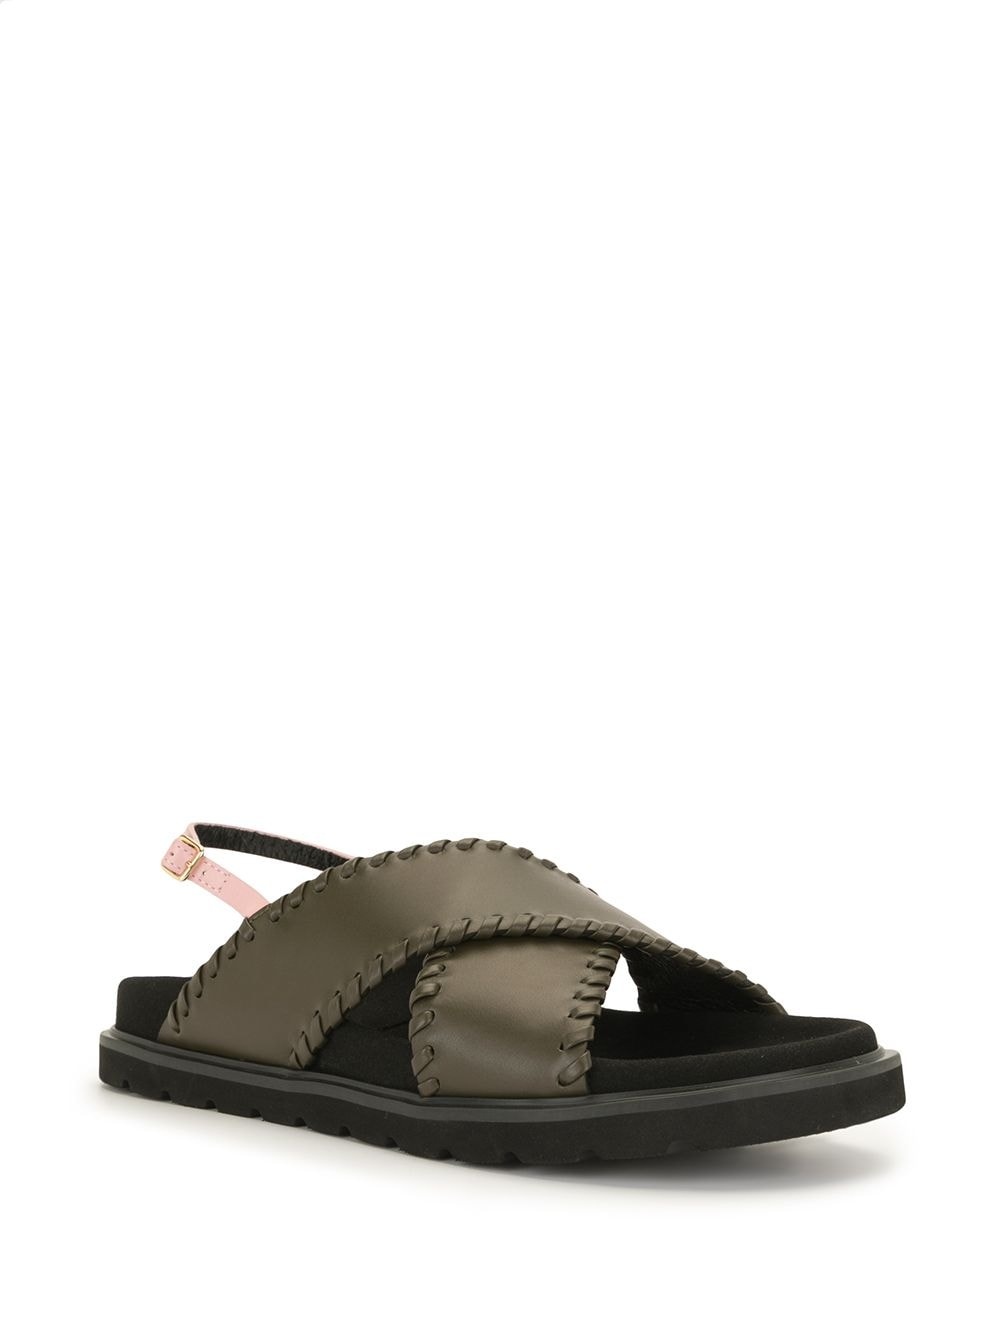 leather crossover sandals - 2